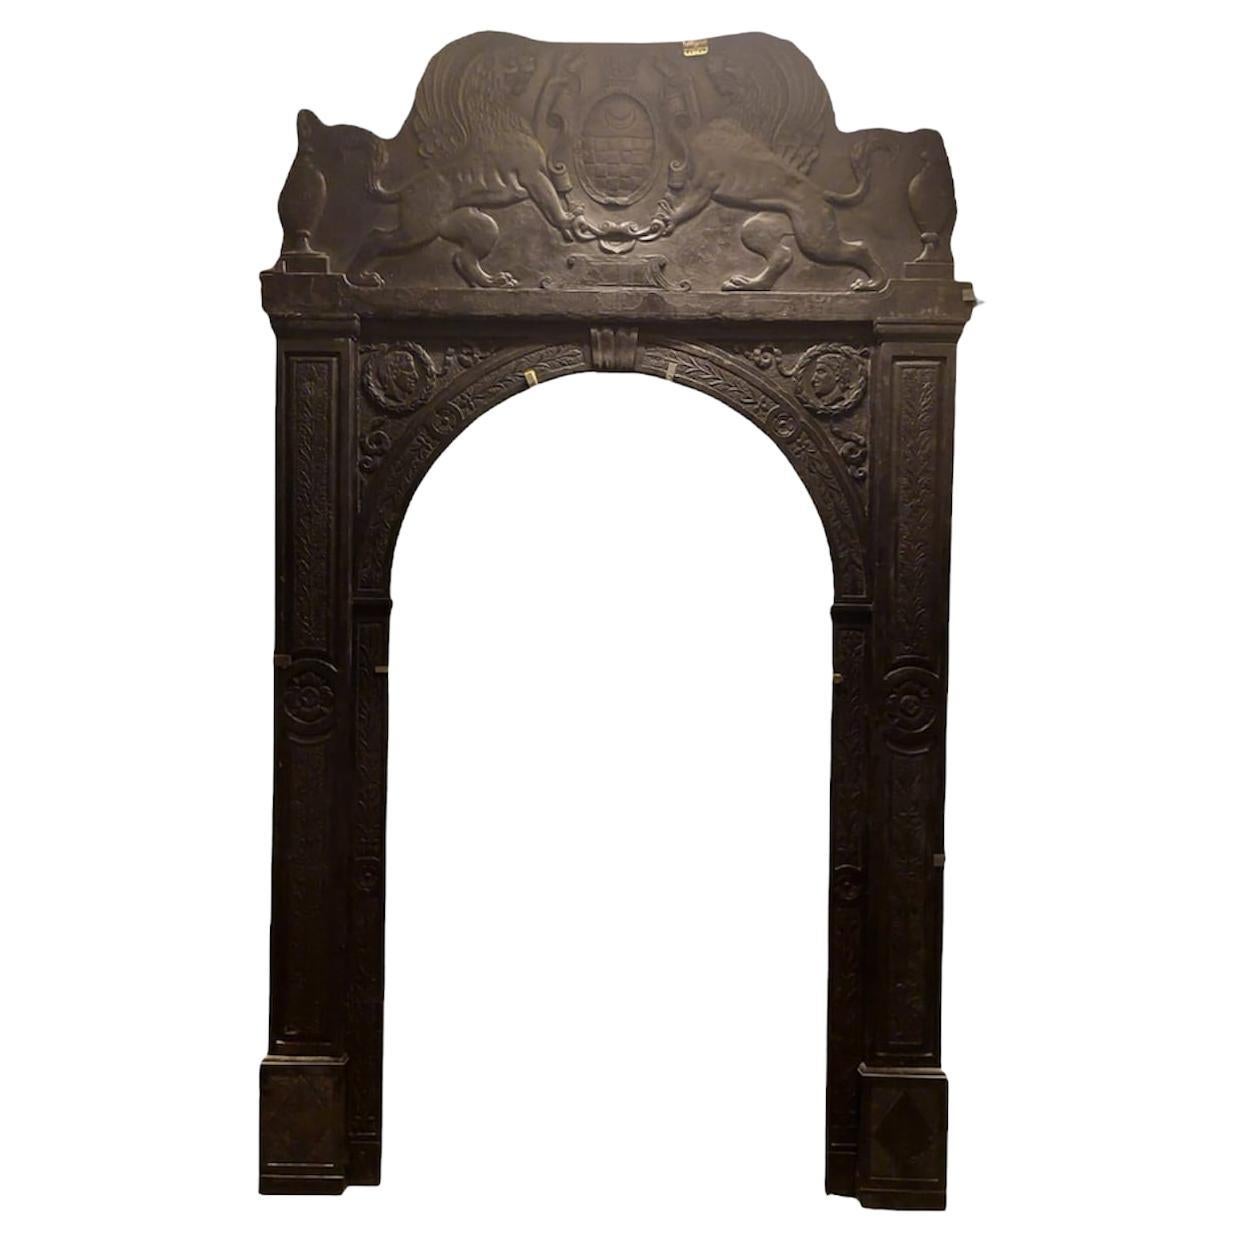 Important and Antique Portal Frame in Black Slate, 16th Century, Italy Genoa